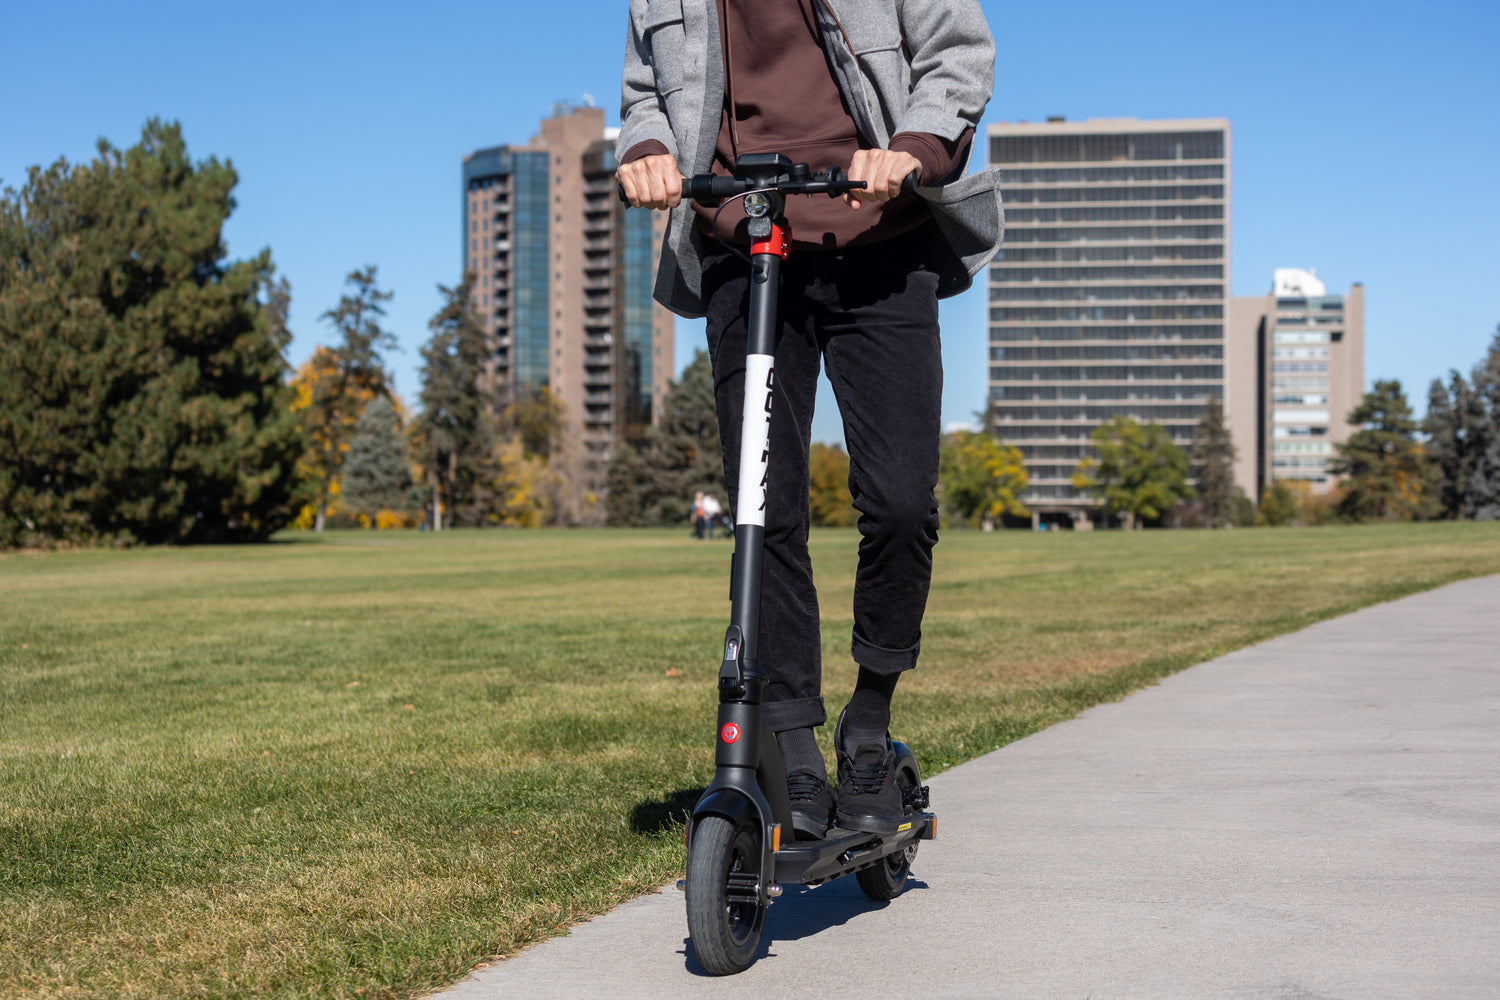 Product Overview: The G4 Electric Scooter for Adults